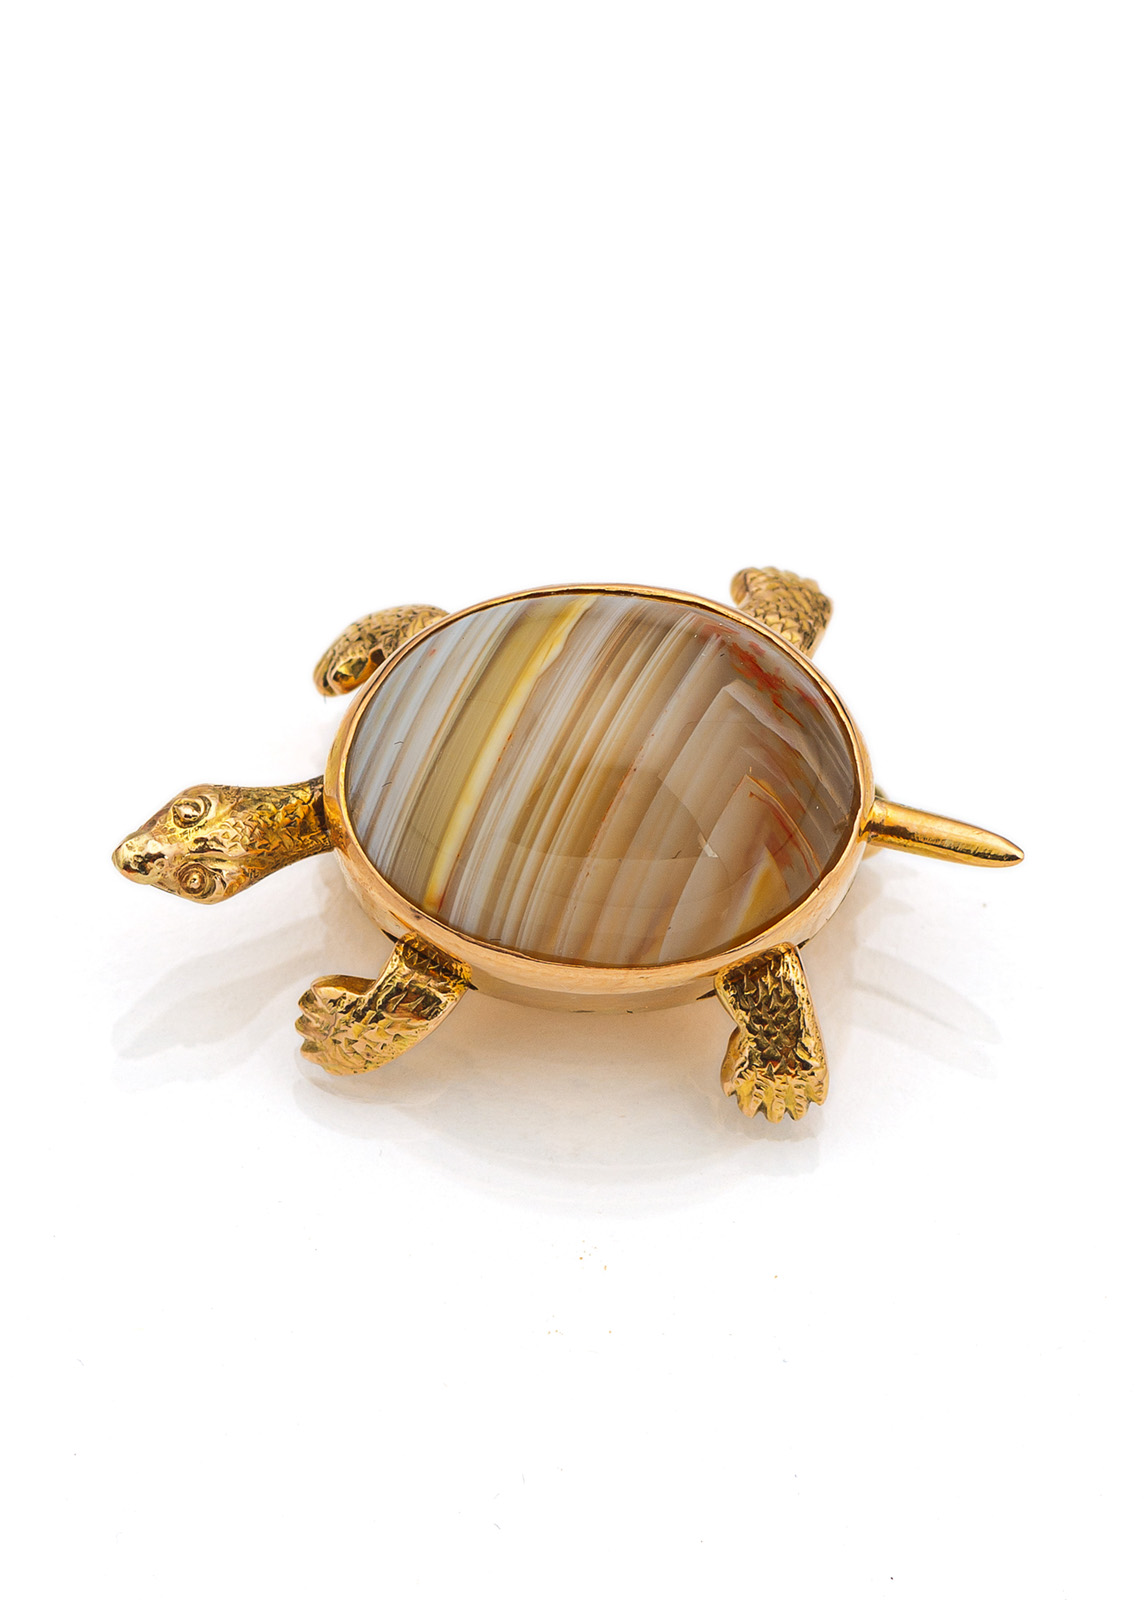 <b>A TURTLE SHAPED BROOCH WITH MOVABLE LIMBS</b>